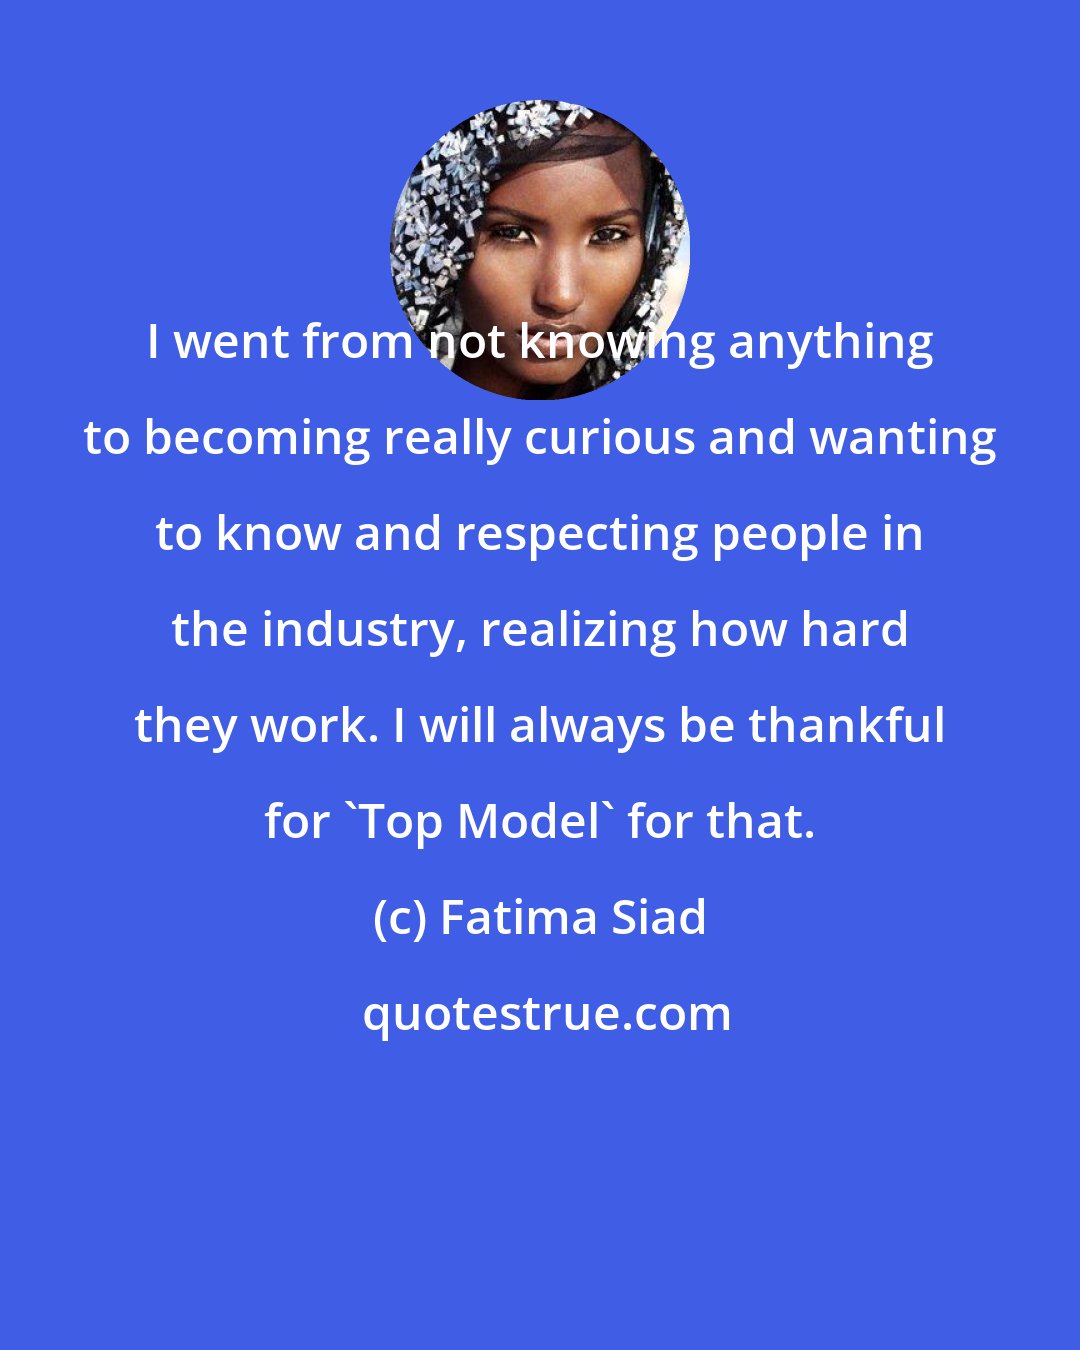 Fatima Siad: I went from not knowing anything to becoming really curious and wanting to know and respecting people in the industry, realizing how hard they work. I will always be thankful for 'Top Model' for that.